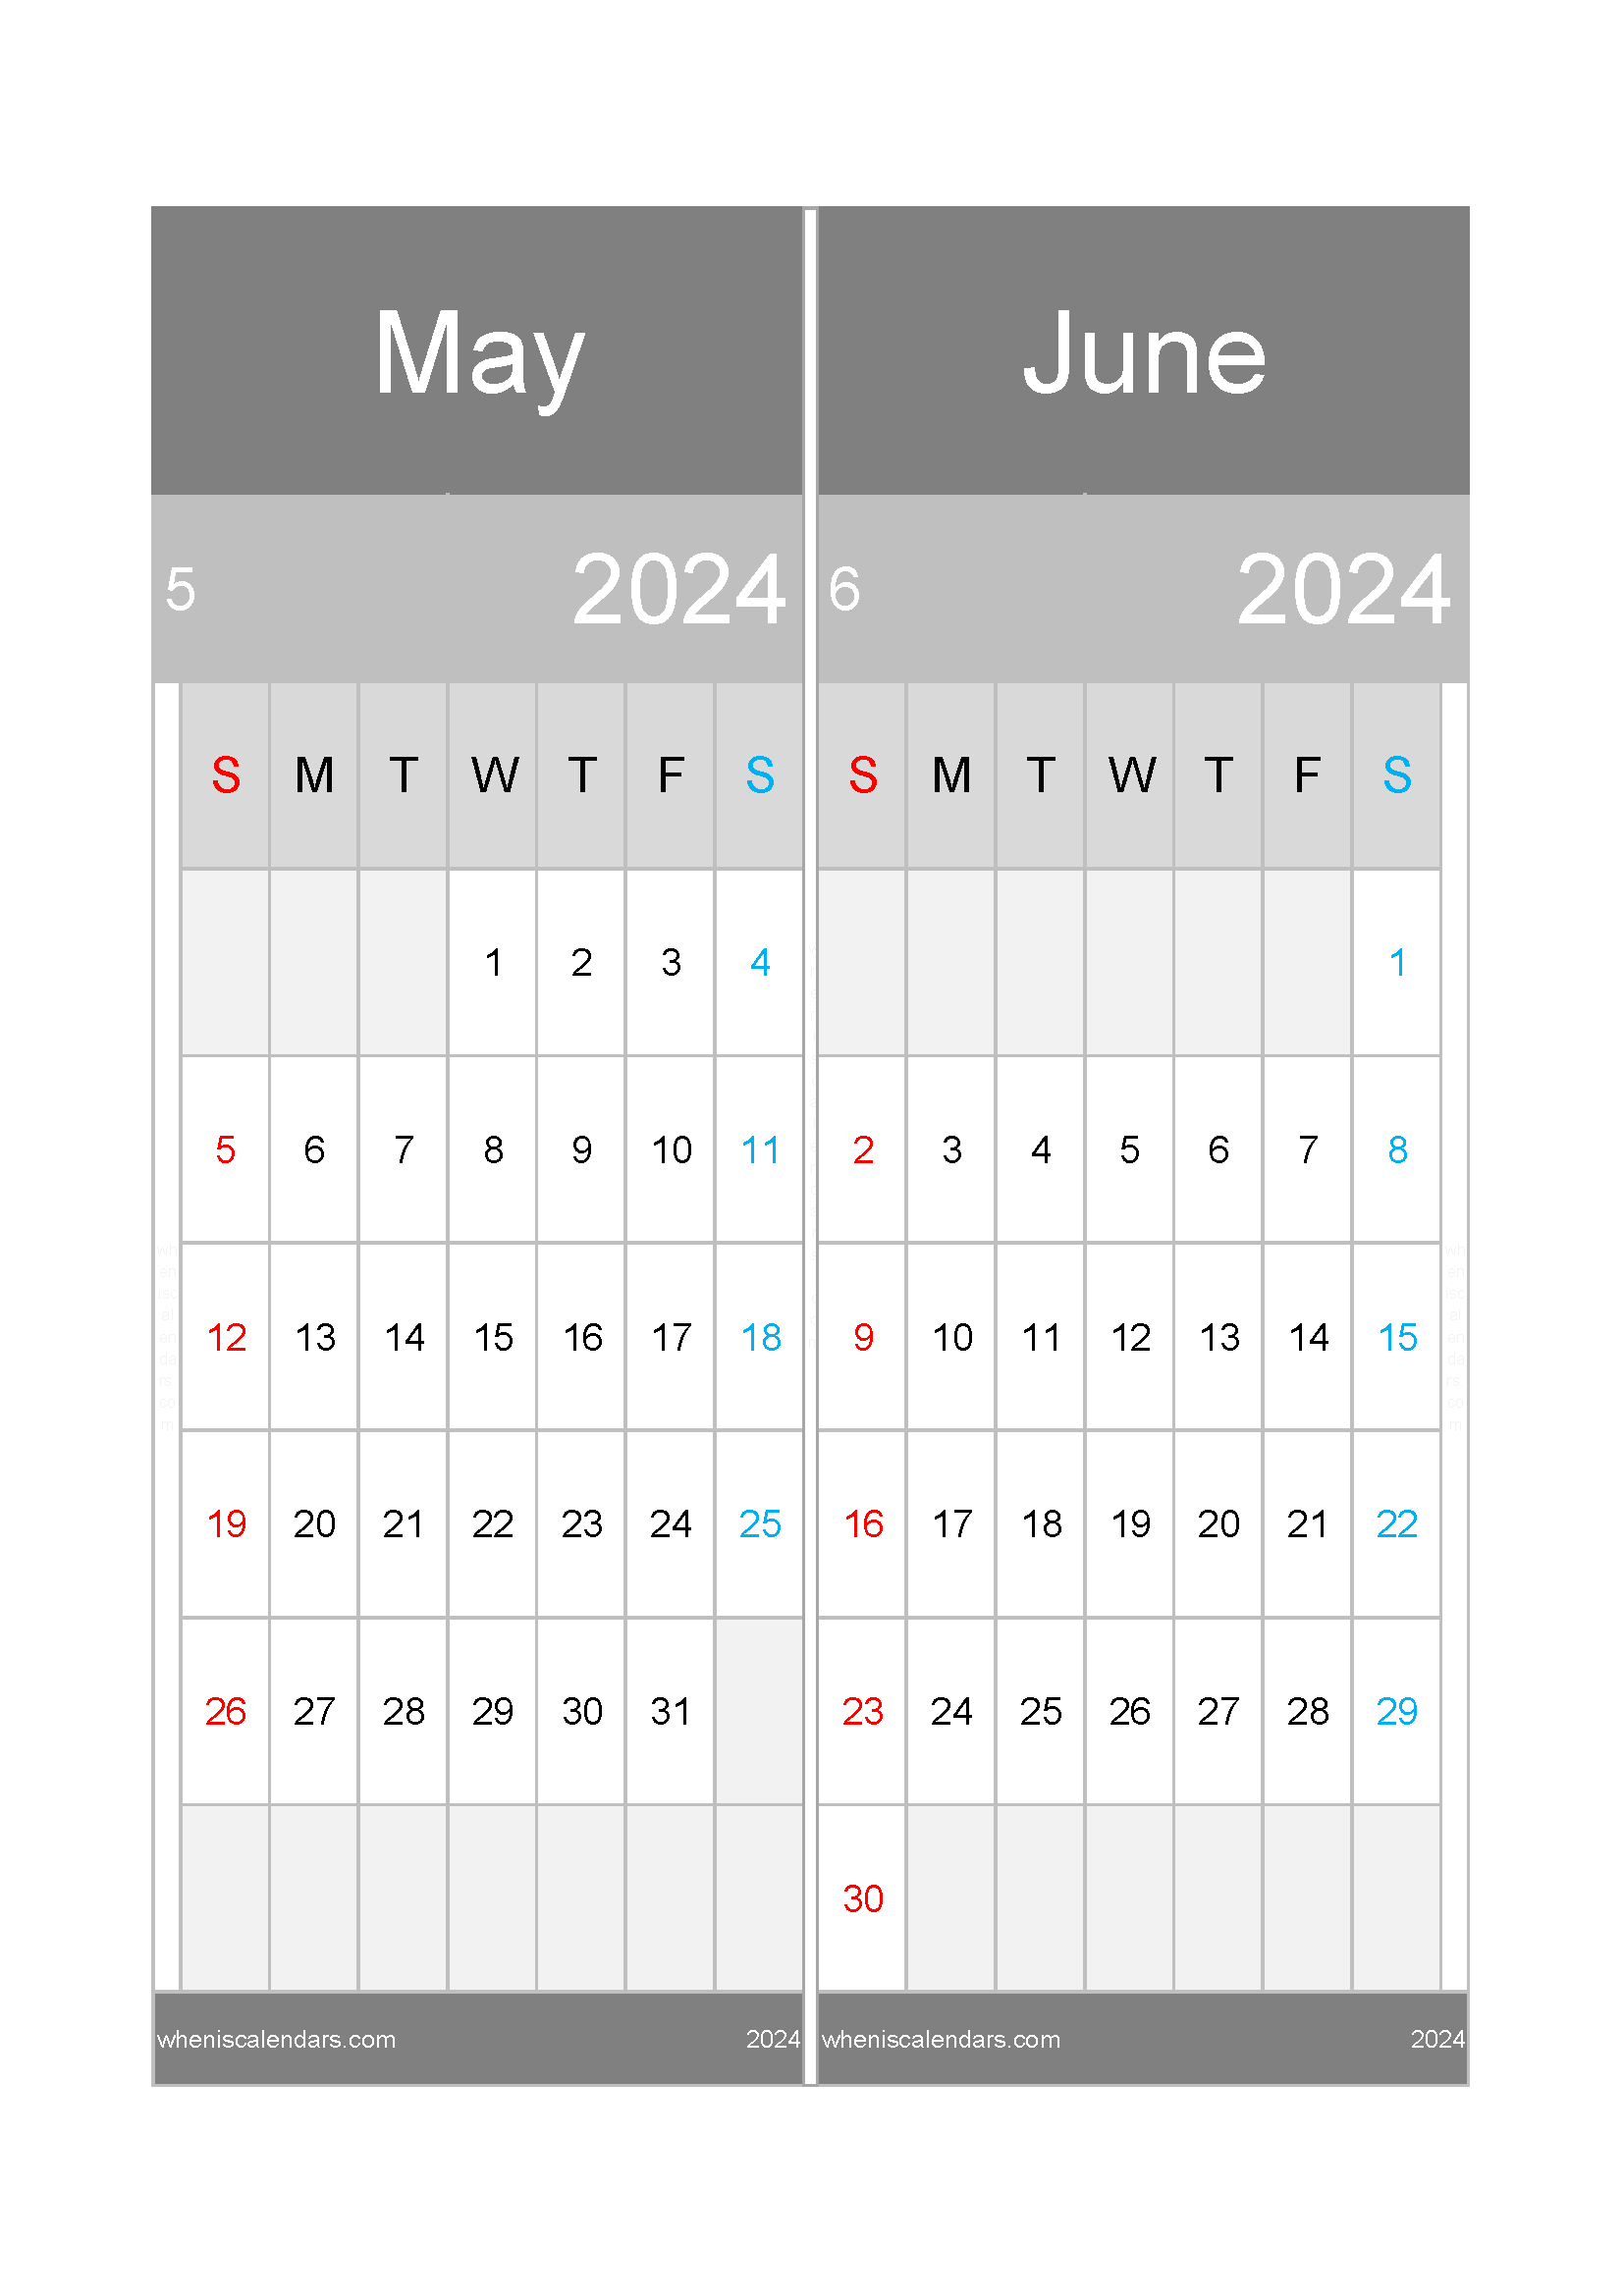 Download calendar for May and June 2024 A4 MJ242019